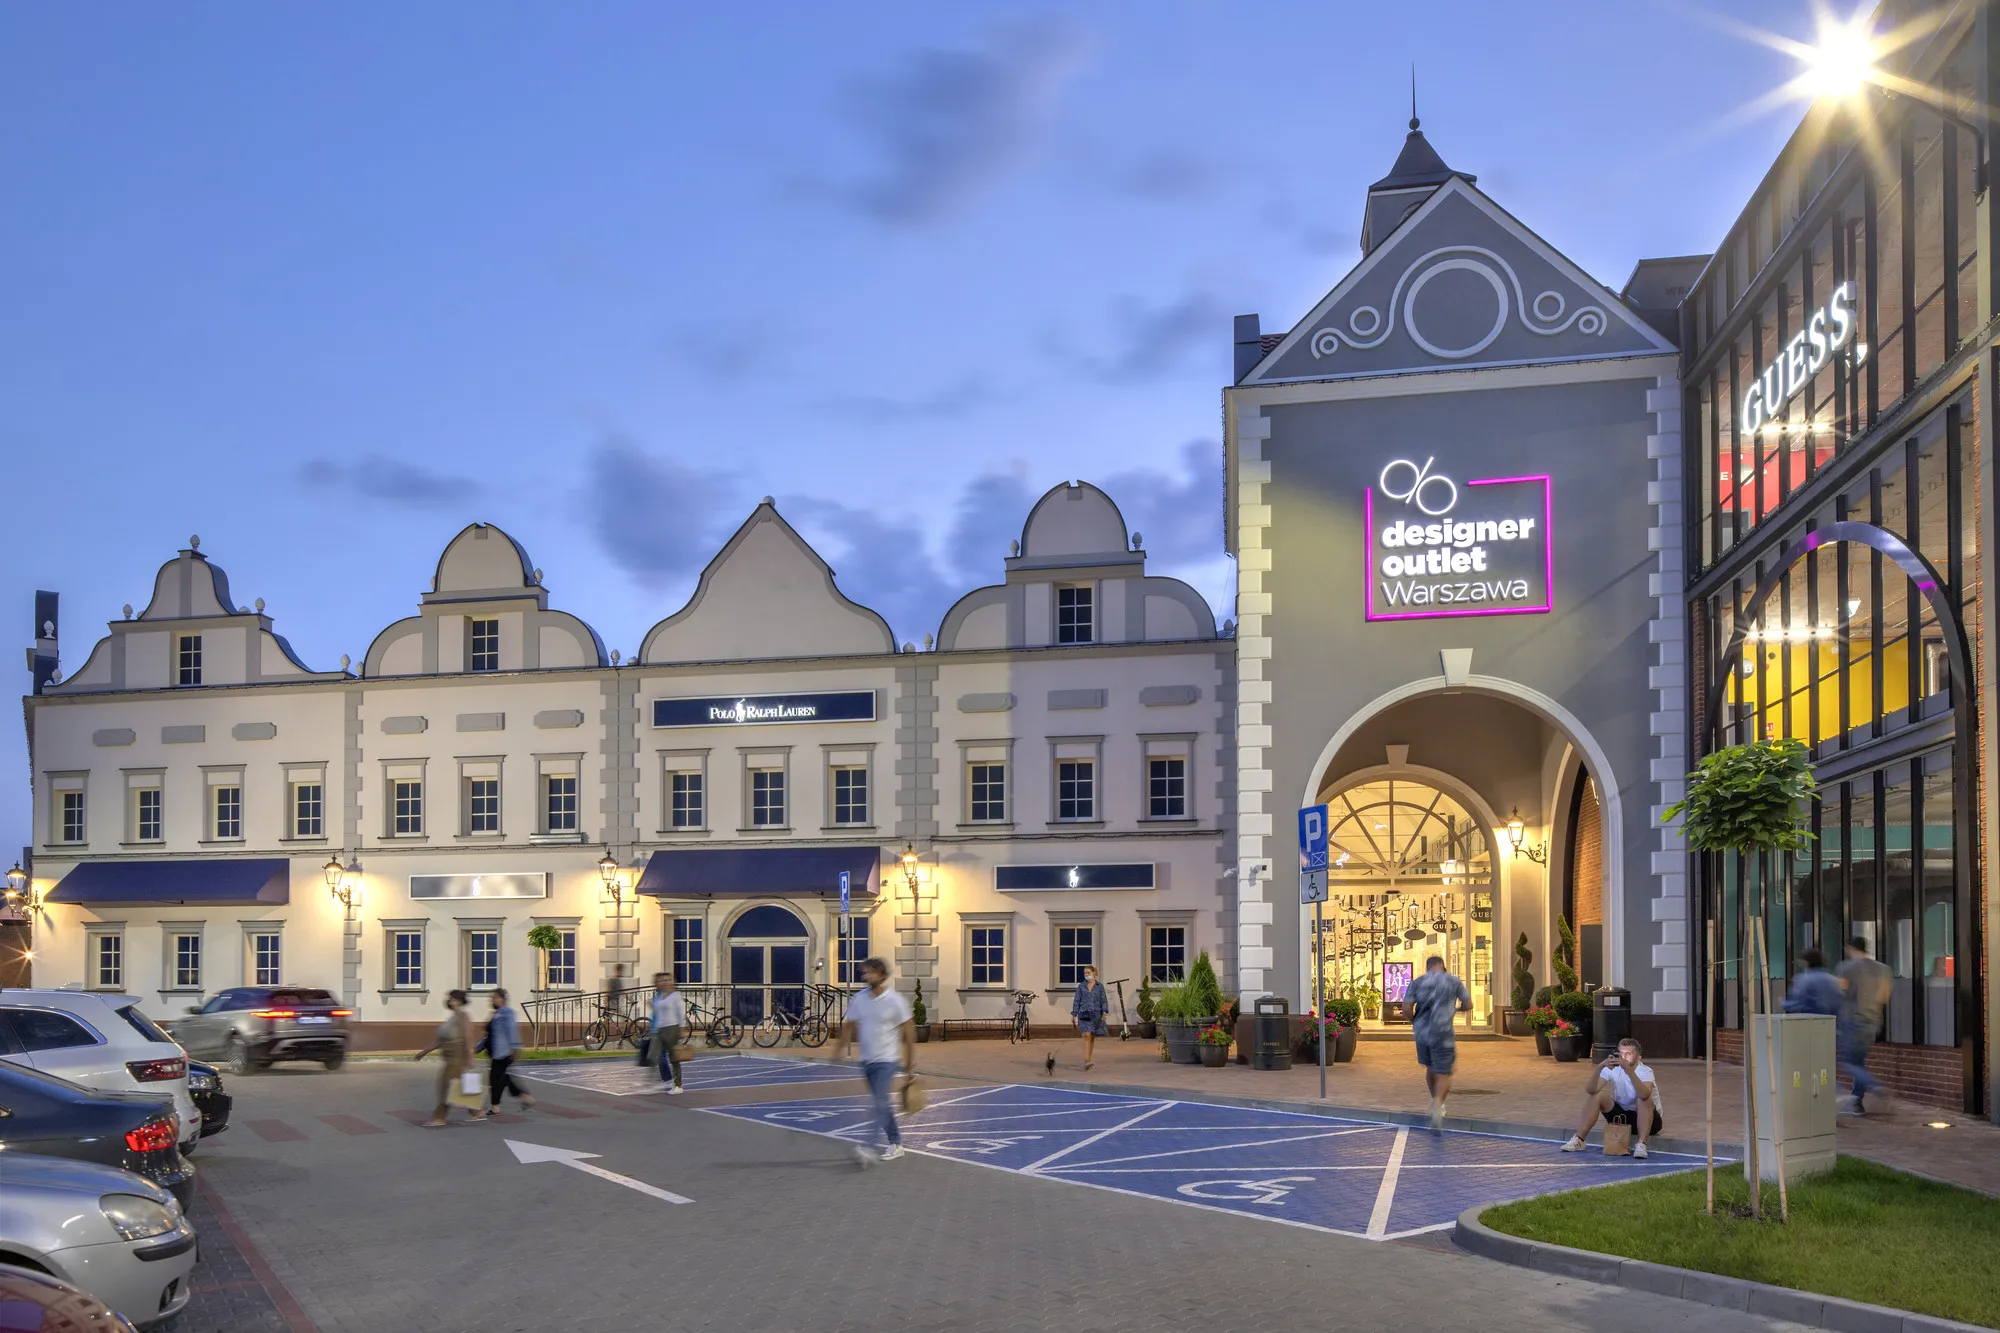 Designer Outlet Warszaw in Poland, europe | Handbags,Shoes,Accessories,Clothes,Swimwear - Country Helper